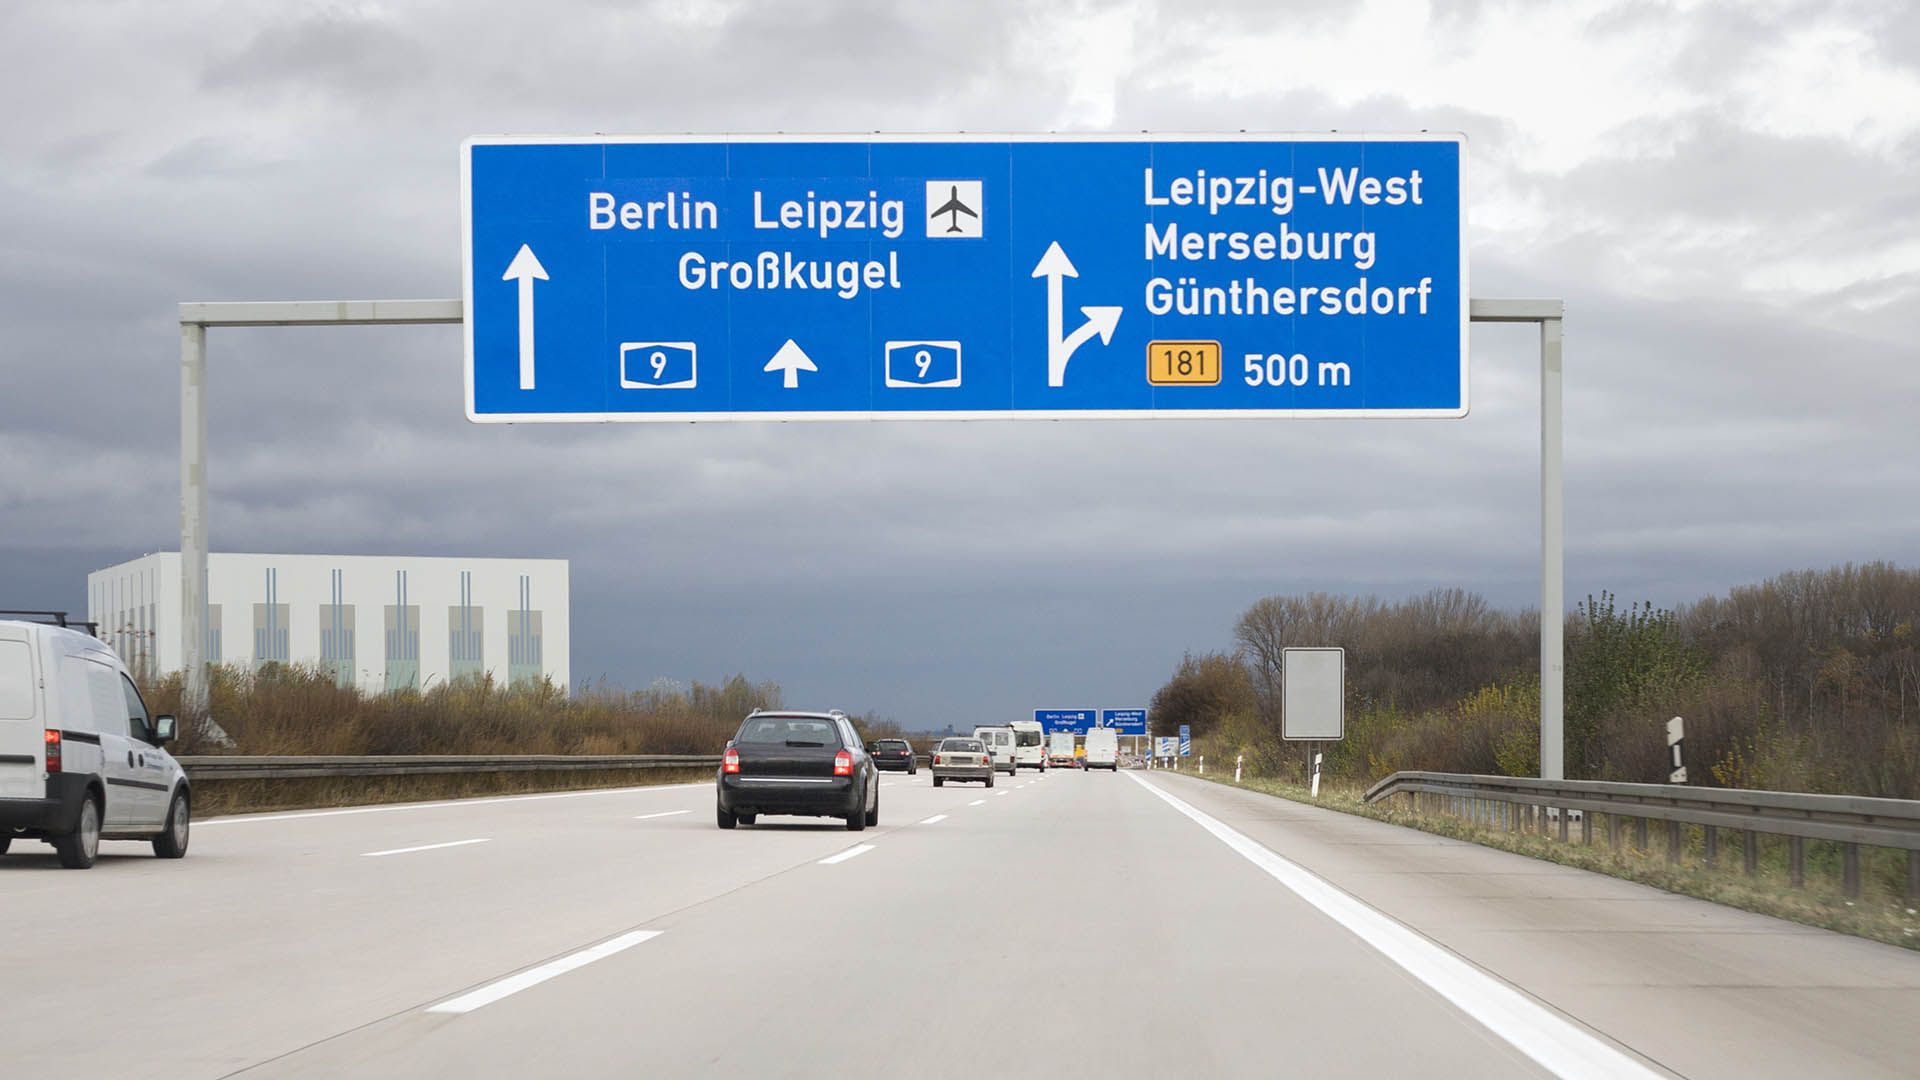 Road sign on german autobahn A9 - some minor motion blurring. Road sign directs to the german cities Berlin and Leipzig Airport - next exit Leipzig-West